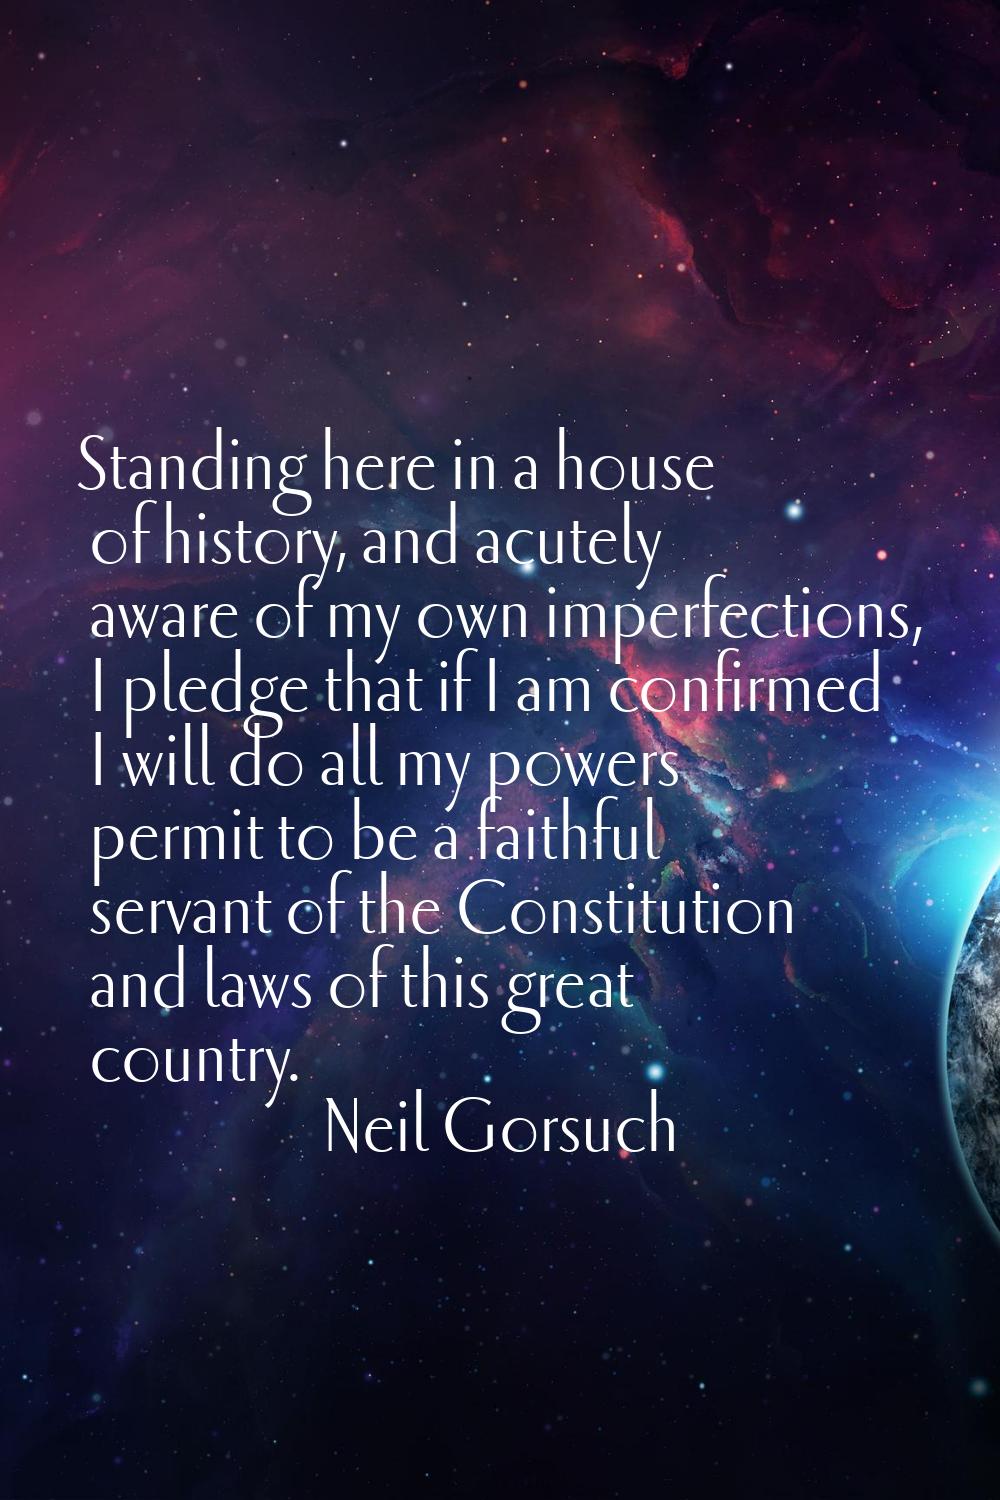 Standing here in a house of history, and acutely aware of my own imperfections, I pledge that if I 